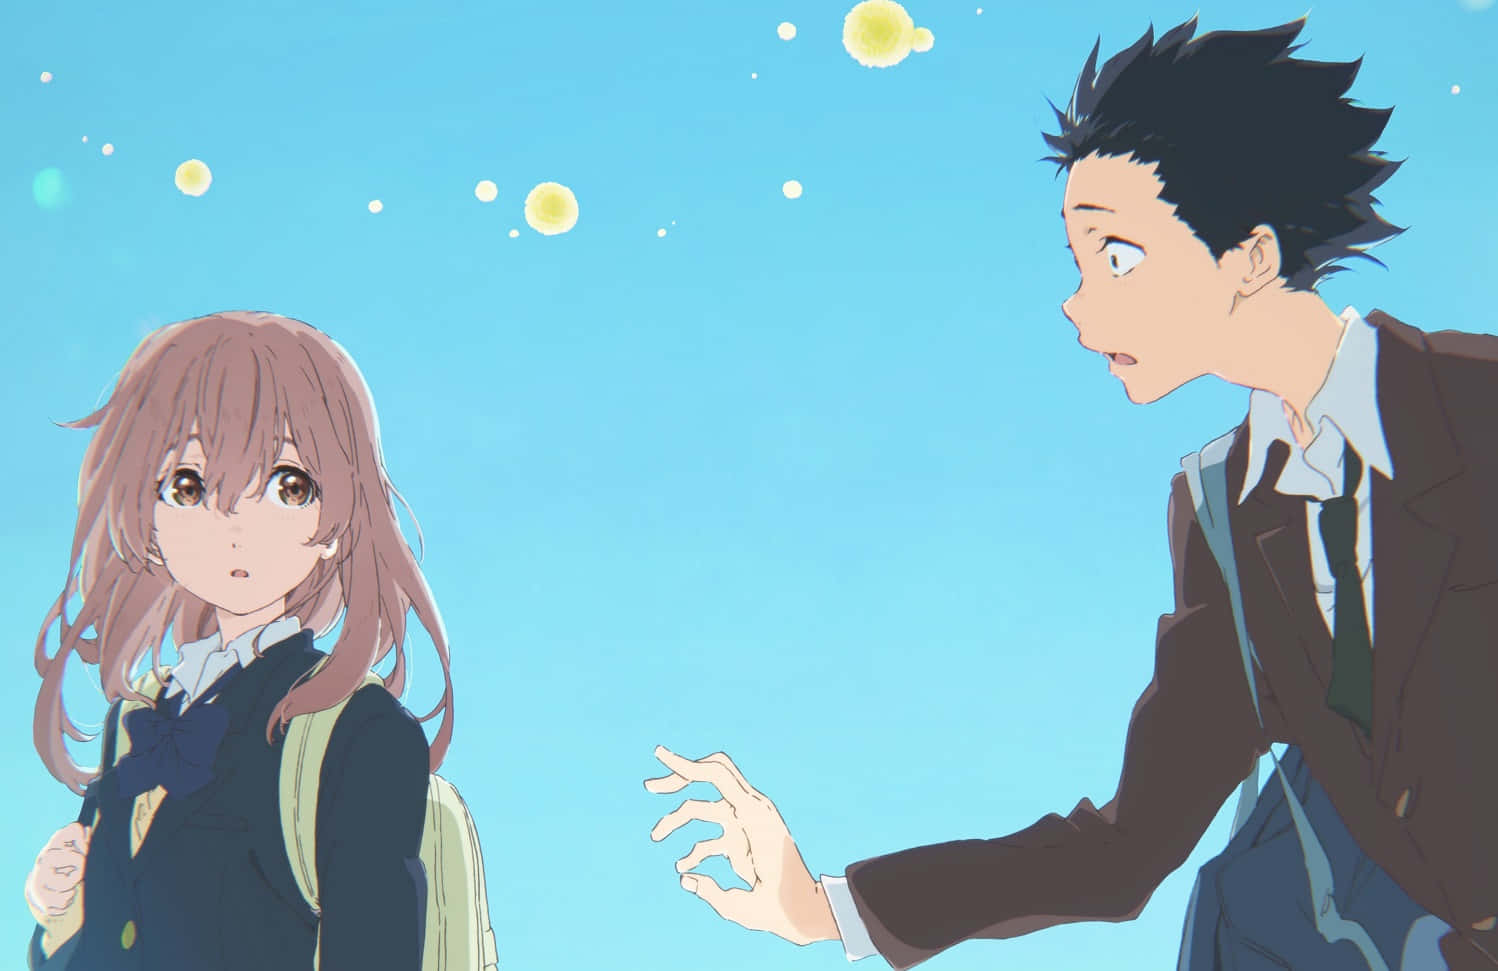 A Silent Voice - A Movie that Explores Bullying